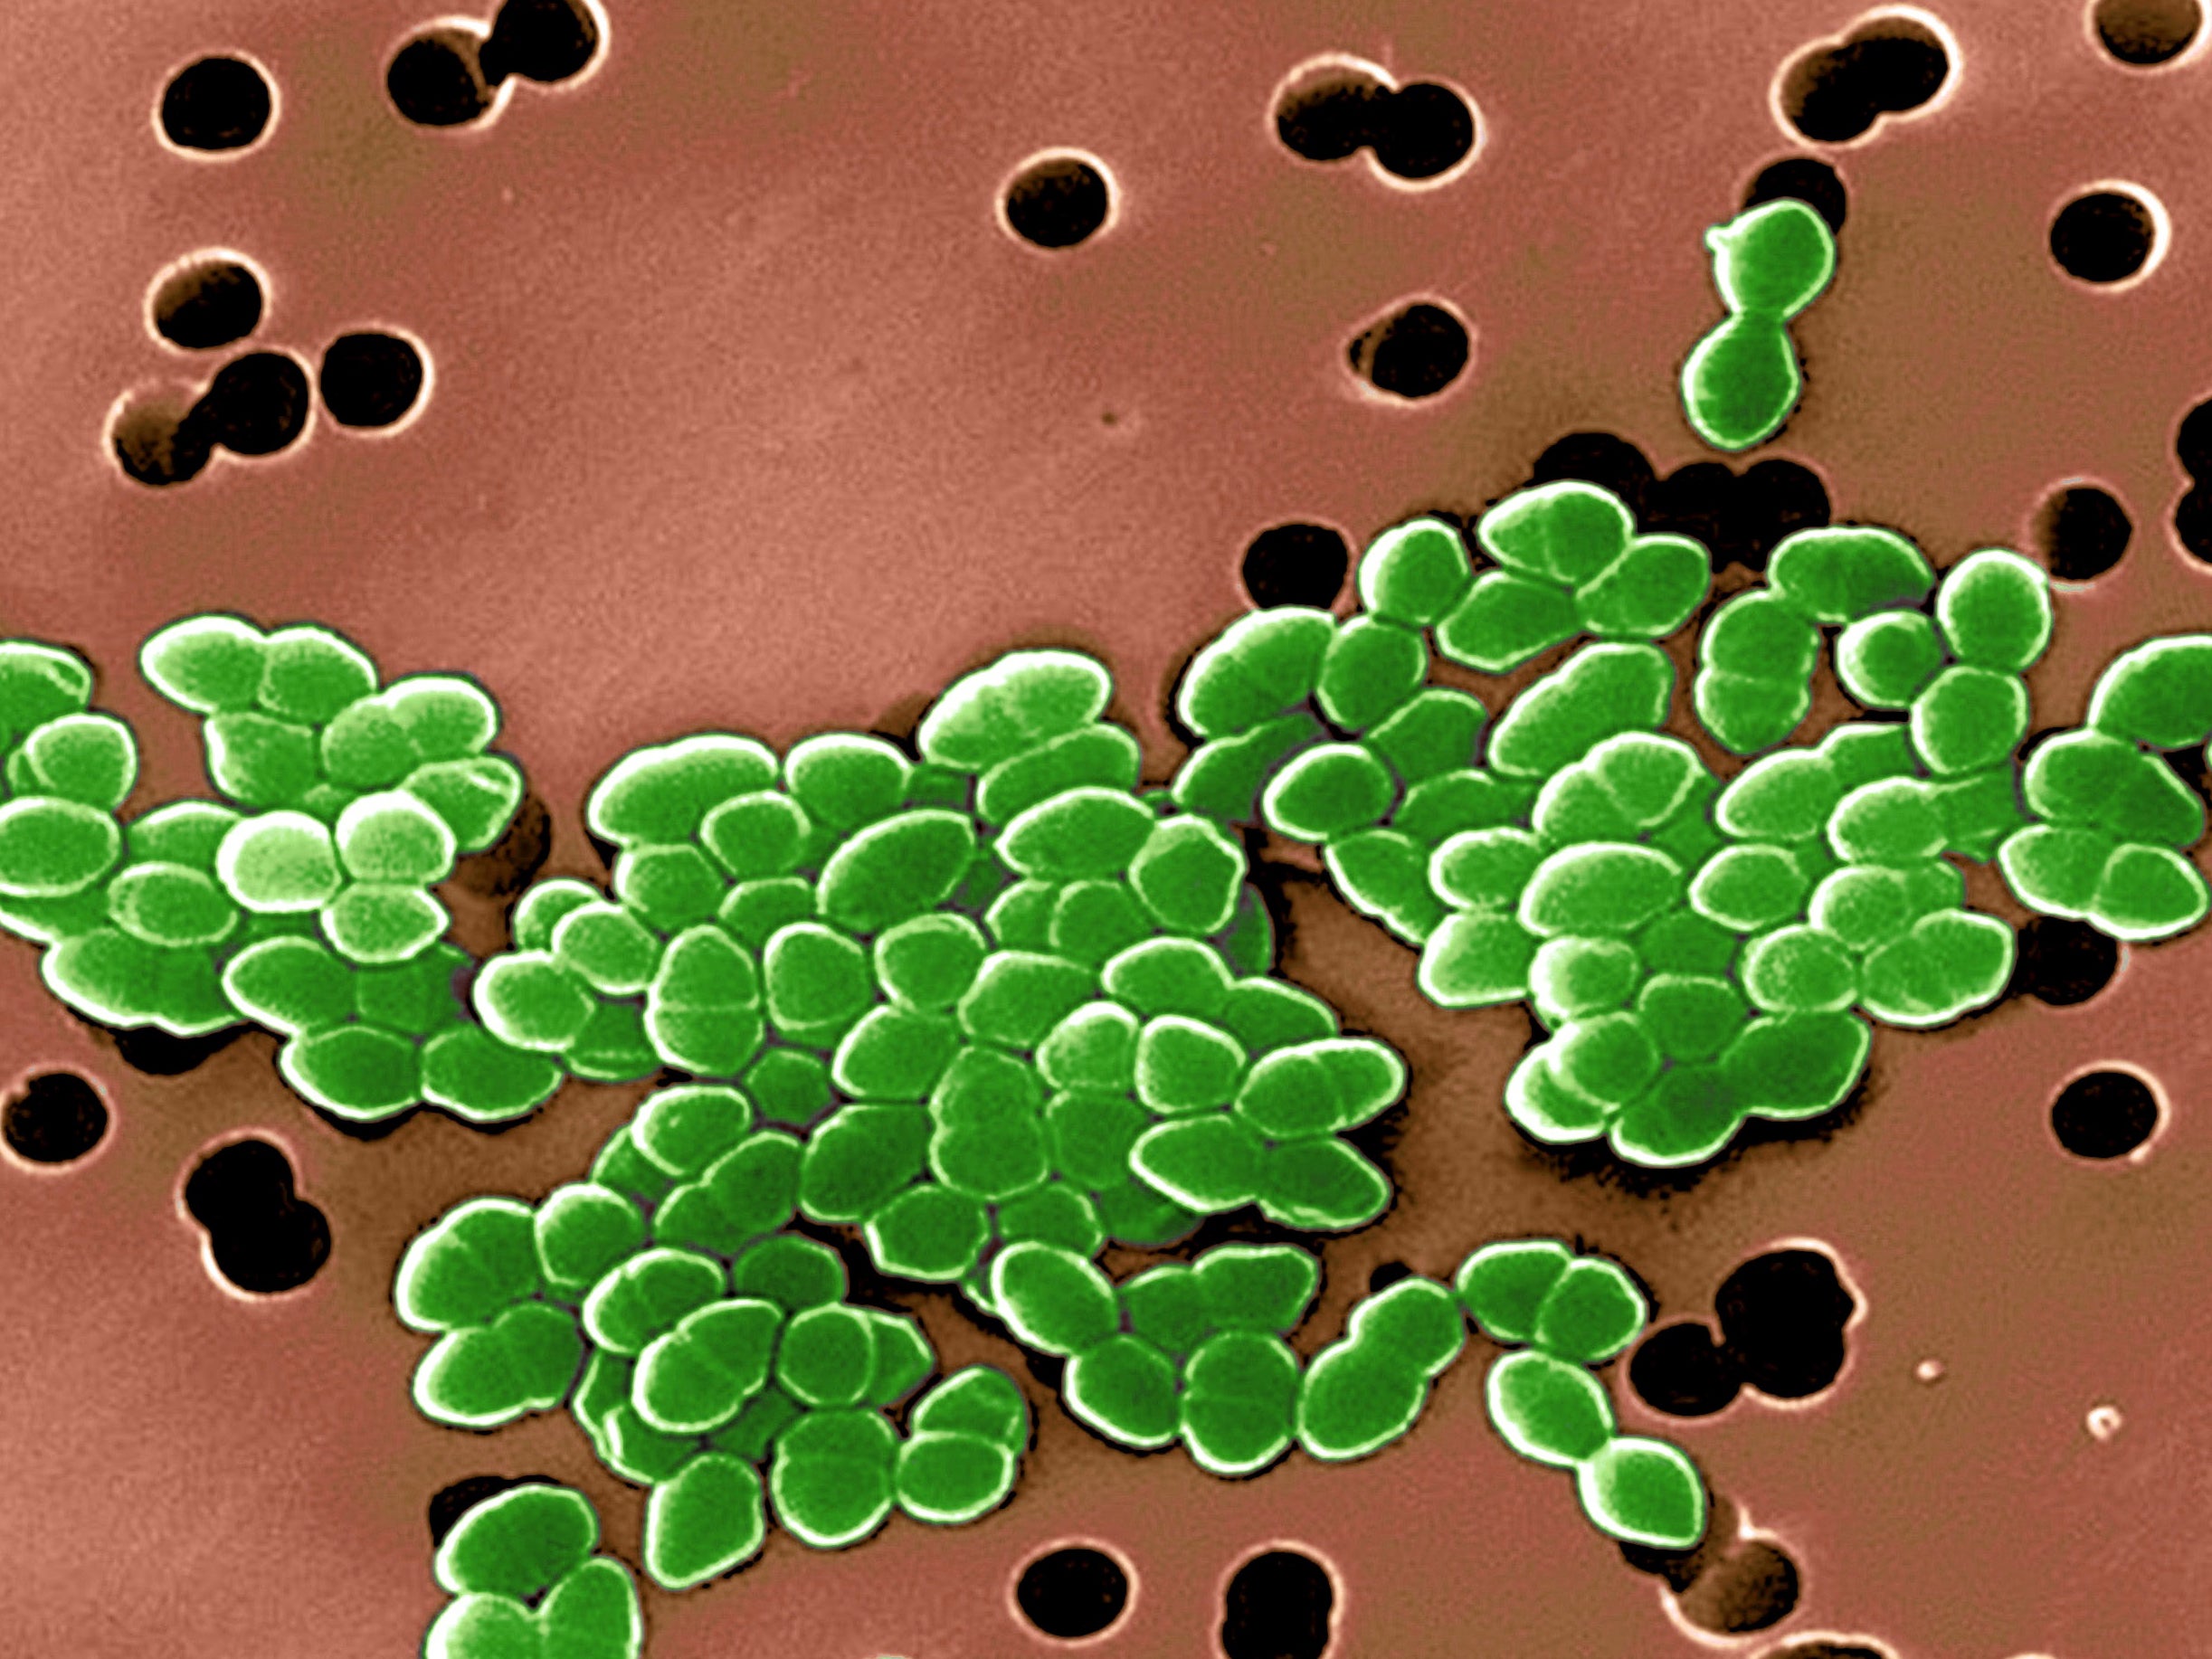 Color enhanced scanning electron micrograph of Vancomycin Resistant Enterococci (VRE). This strain of enterococcus bacteria is resistant to the antibiotic vancomycin. Common infections caused by enterococci are urinary tract inections and wound infections. (Rex Features)